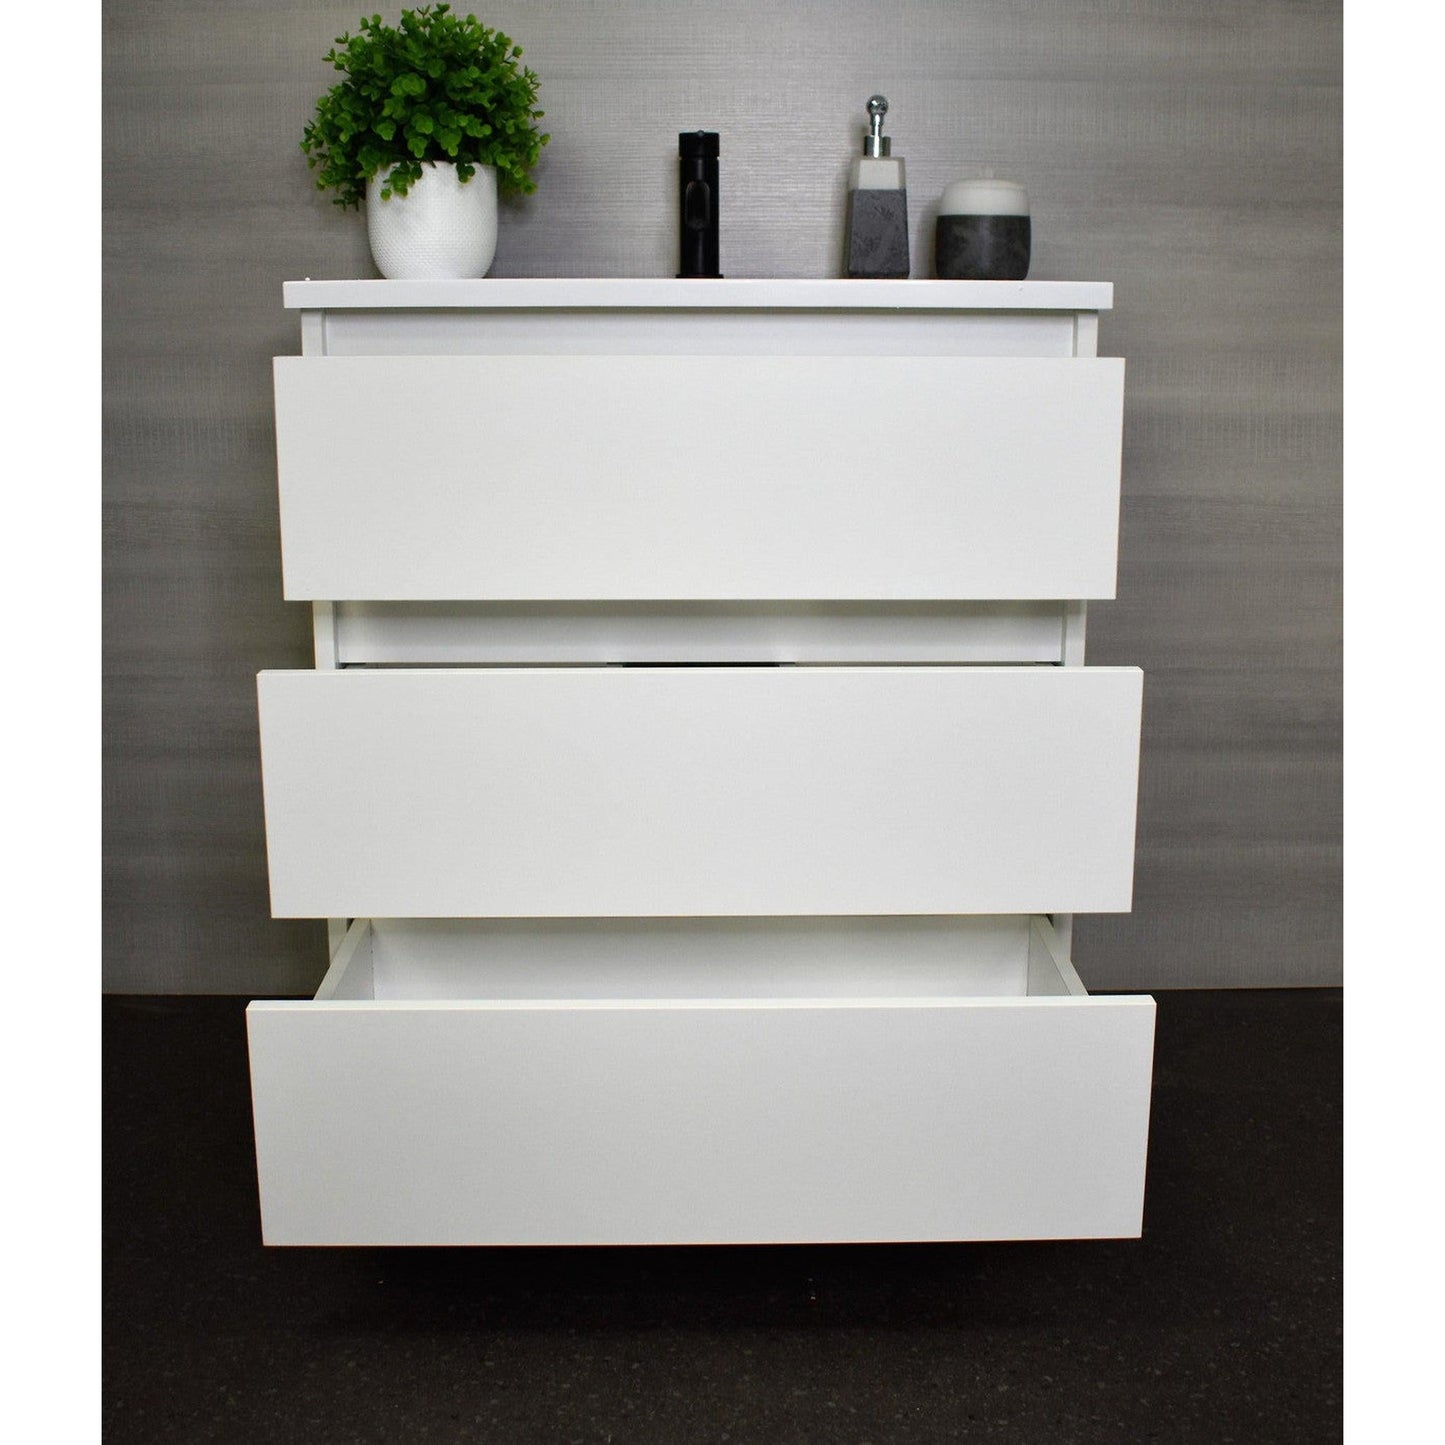 Volpa USA Pepper 24" x 20" White Modern Freestanding Bathroom Vanity With Acrylic Top, Integrated Acrylic Sink and drawers